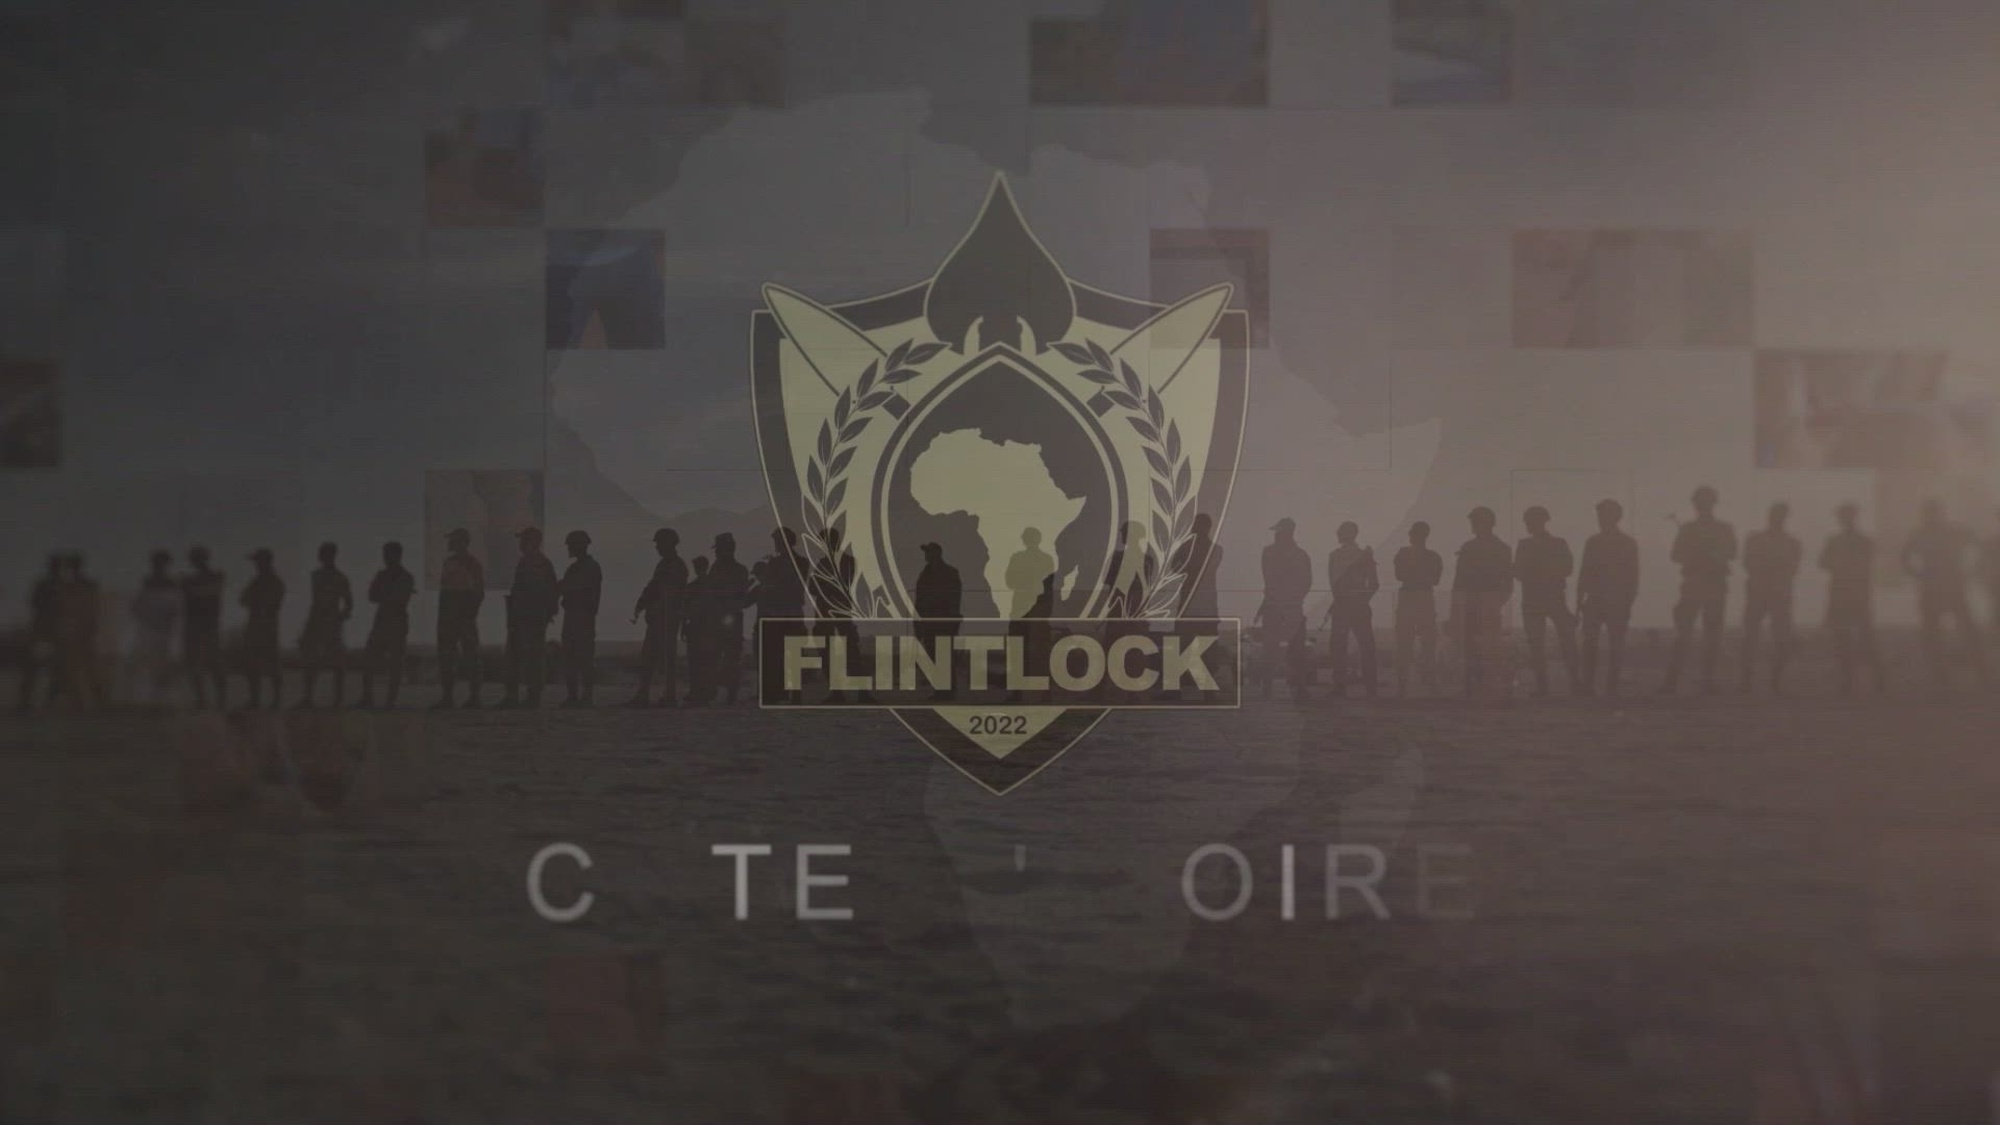 Graphic image of a shield with the words "Flintlock" over it.